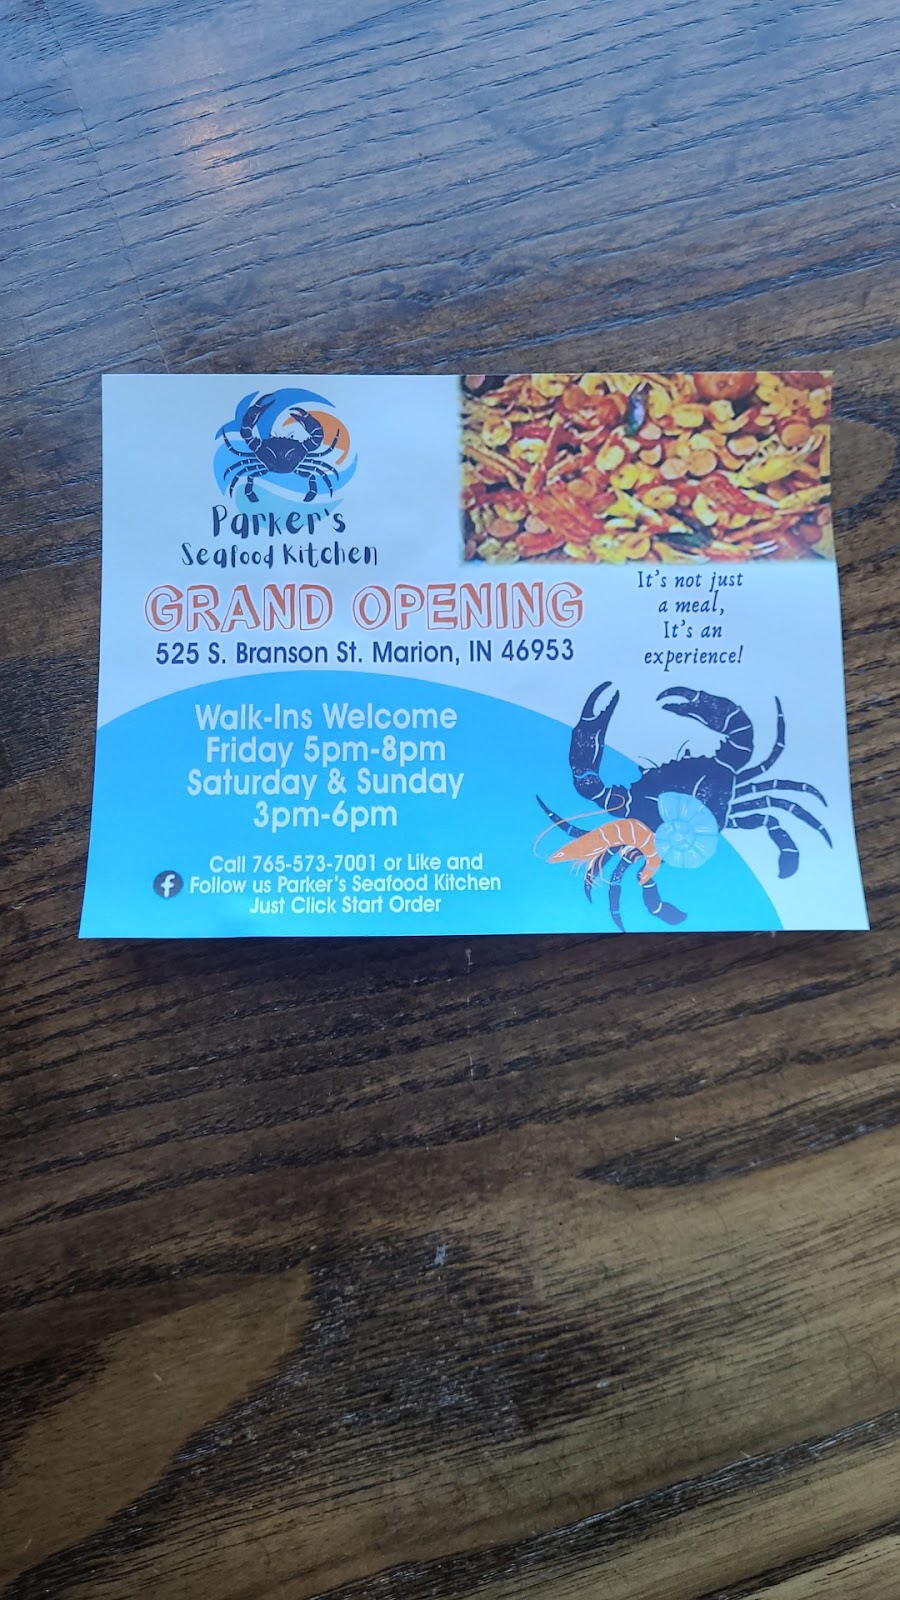 Parkers Seafood Kitchen | restaurant | 525 S Branson St, Marion, IN 46953, USA | 7655737001 OR +1 765-573-7001